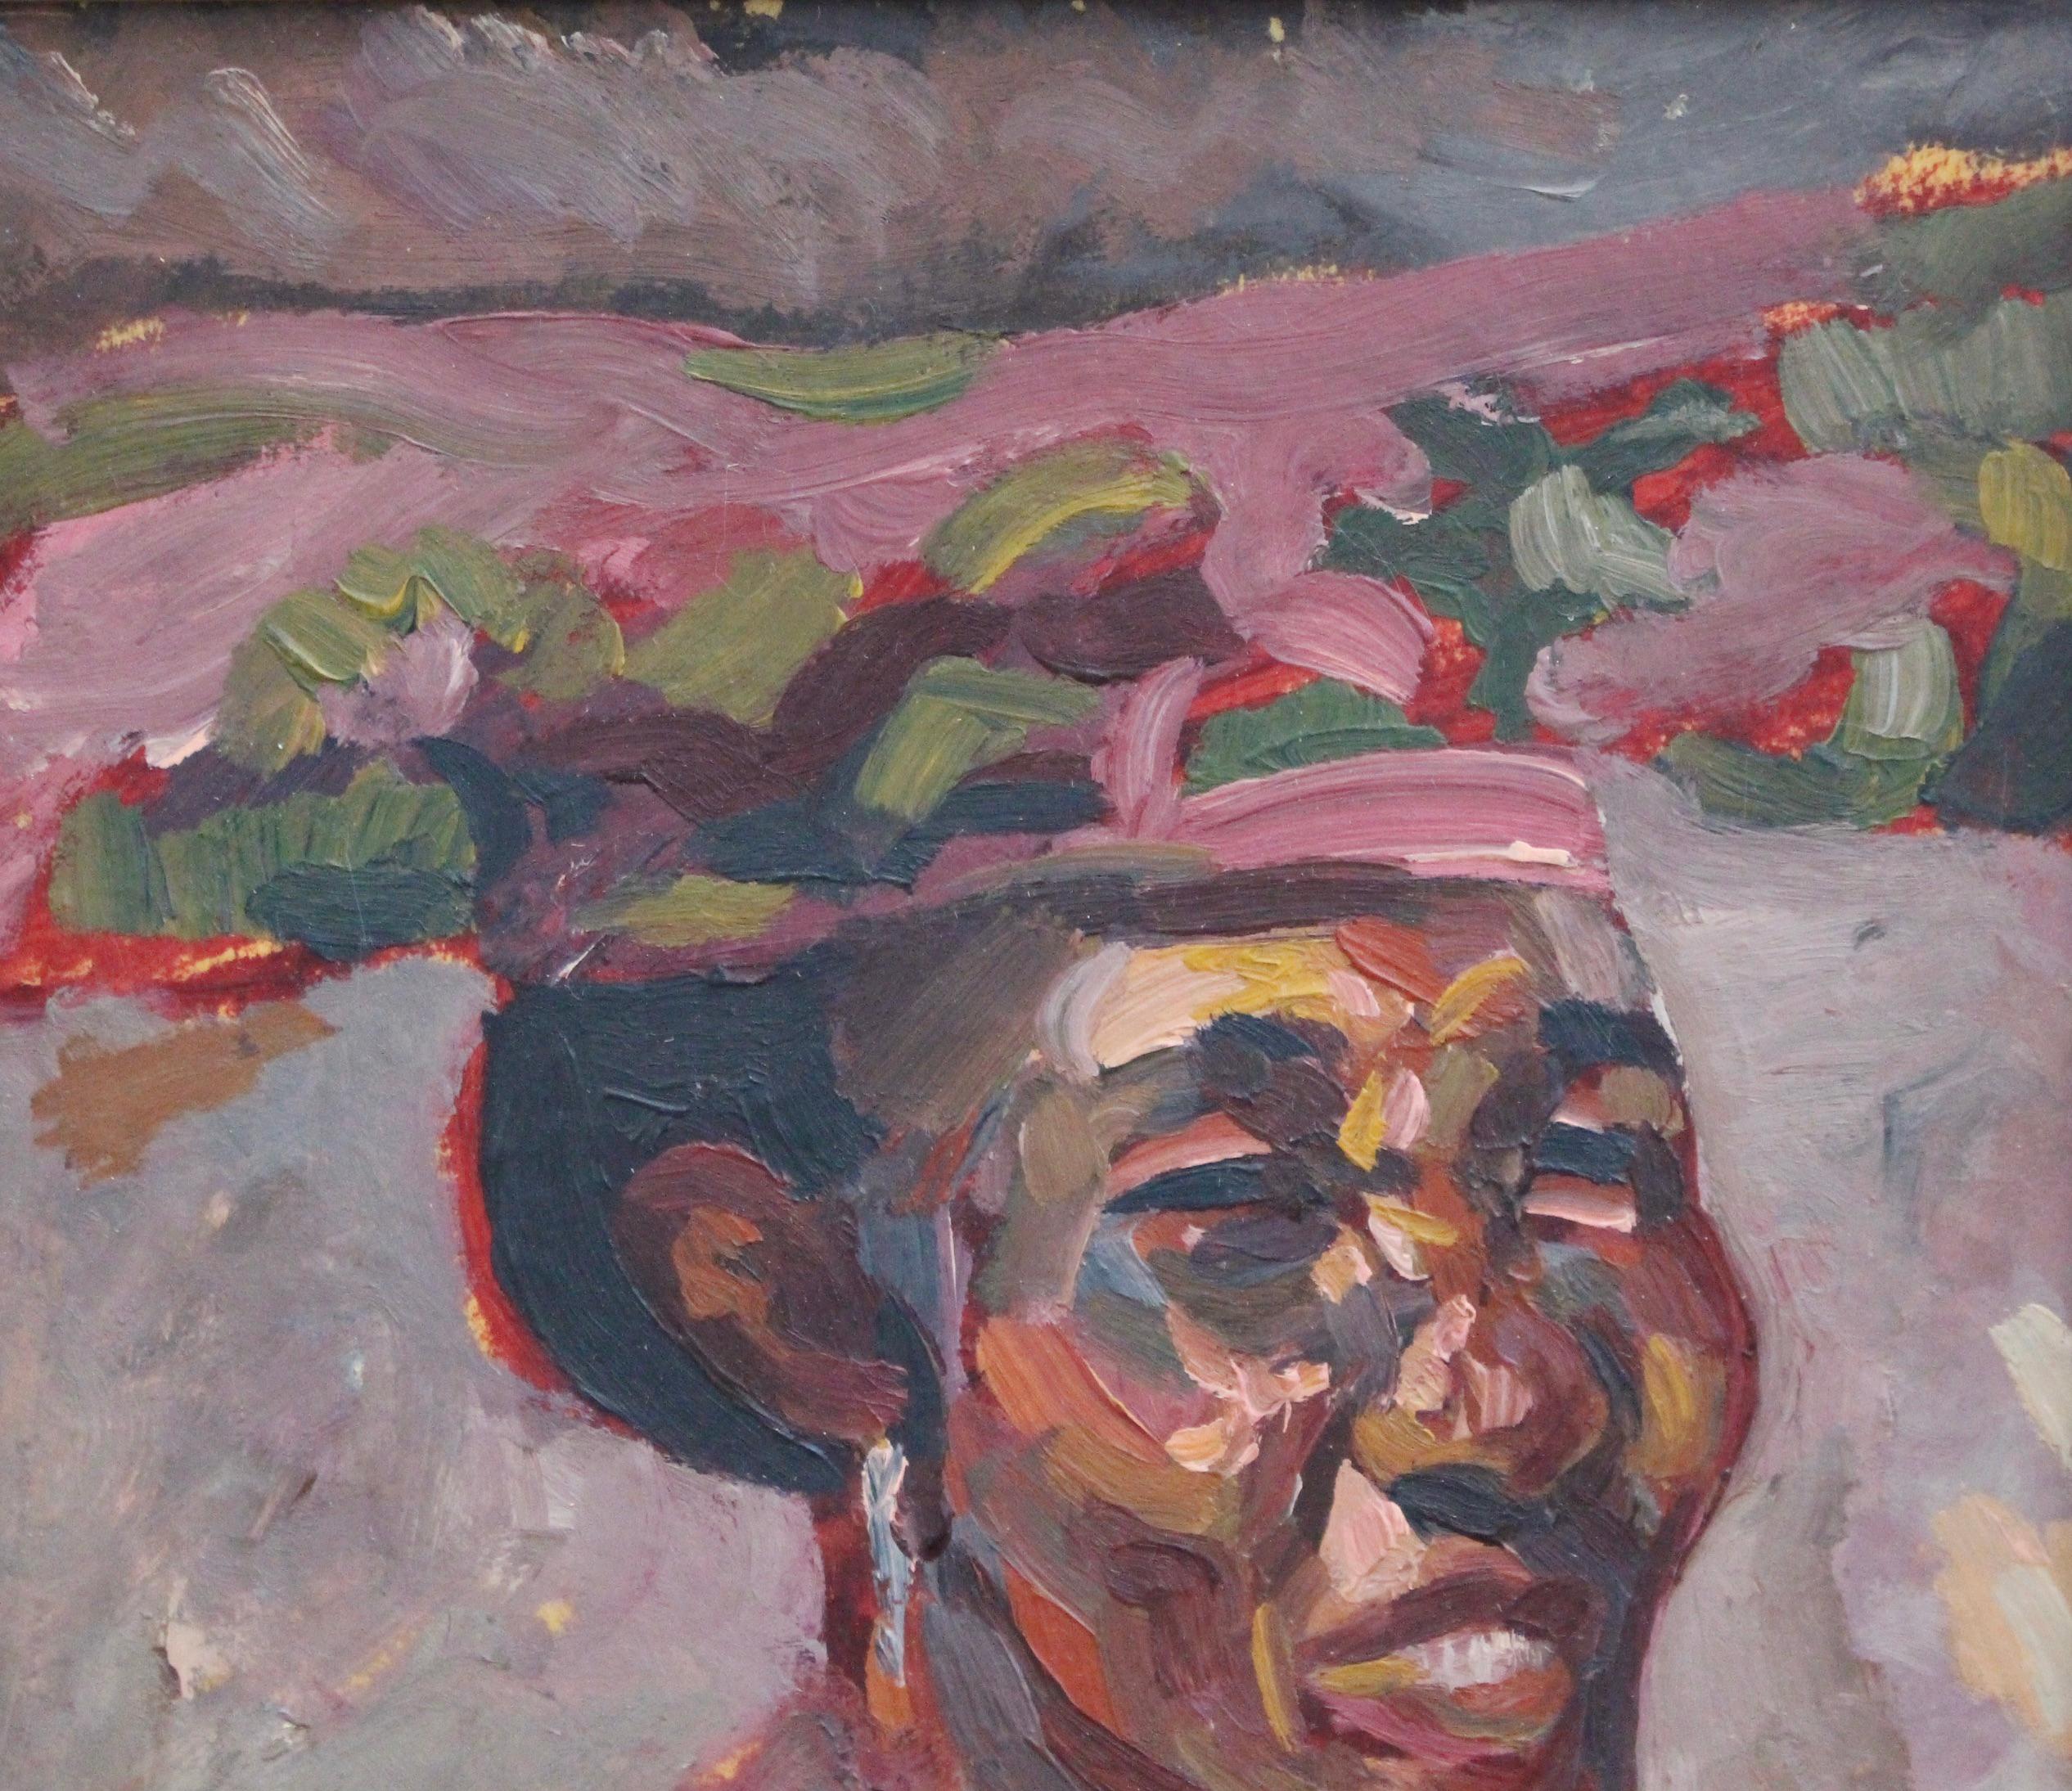 Woman in Headdress - Expressionist Painting by Unknown